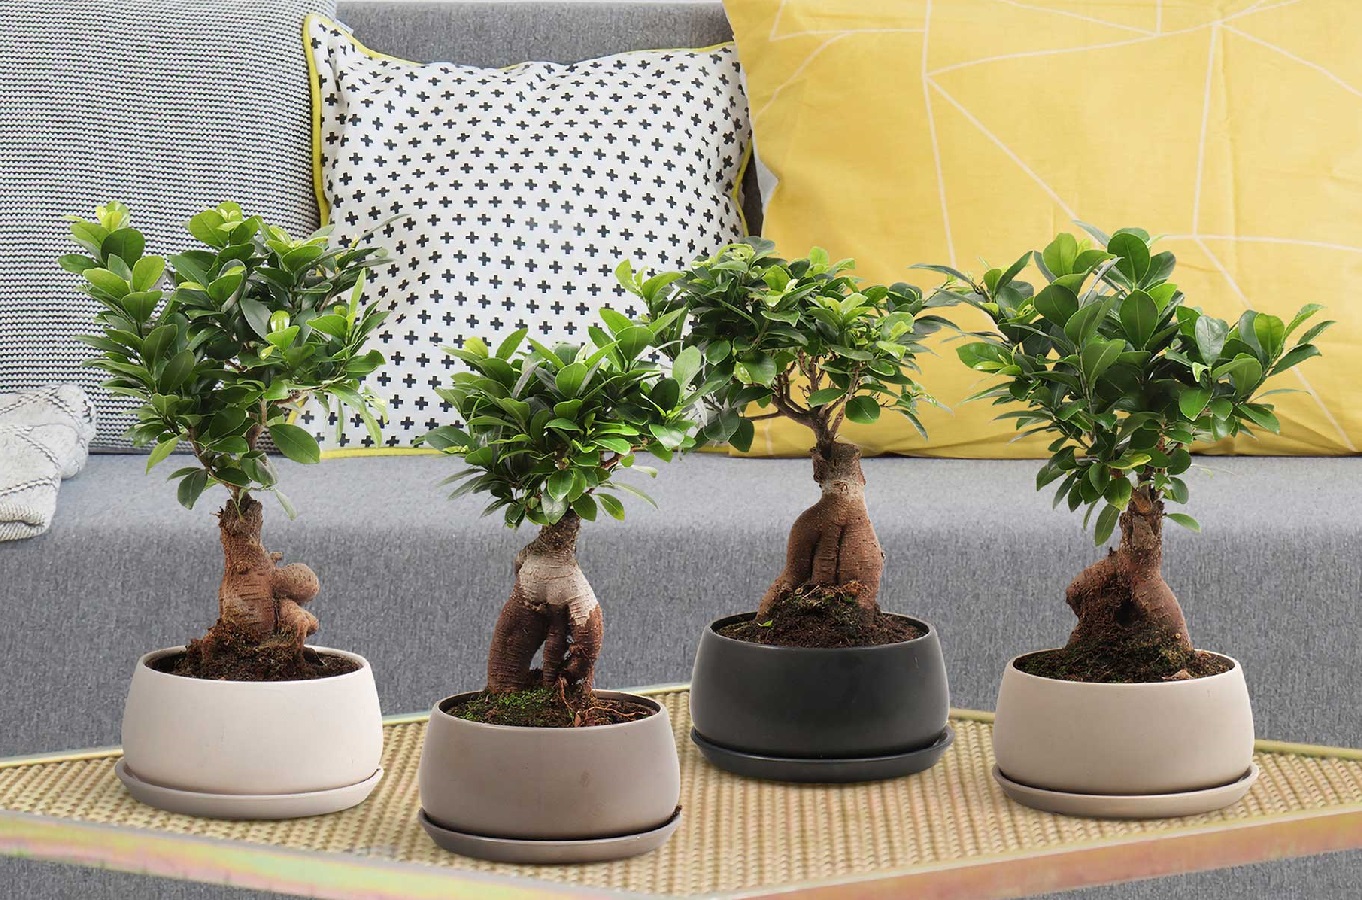 How to Care for a Bonsai Tree   Bonsai Tree Types, Price and Care